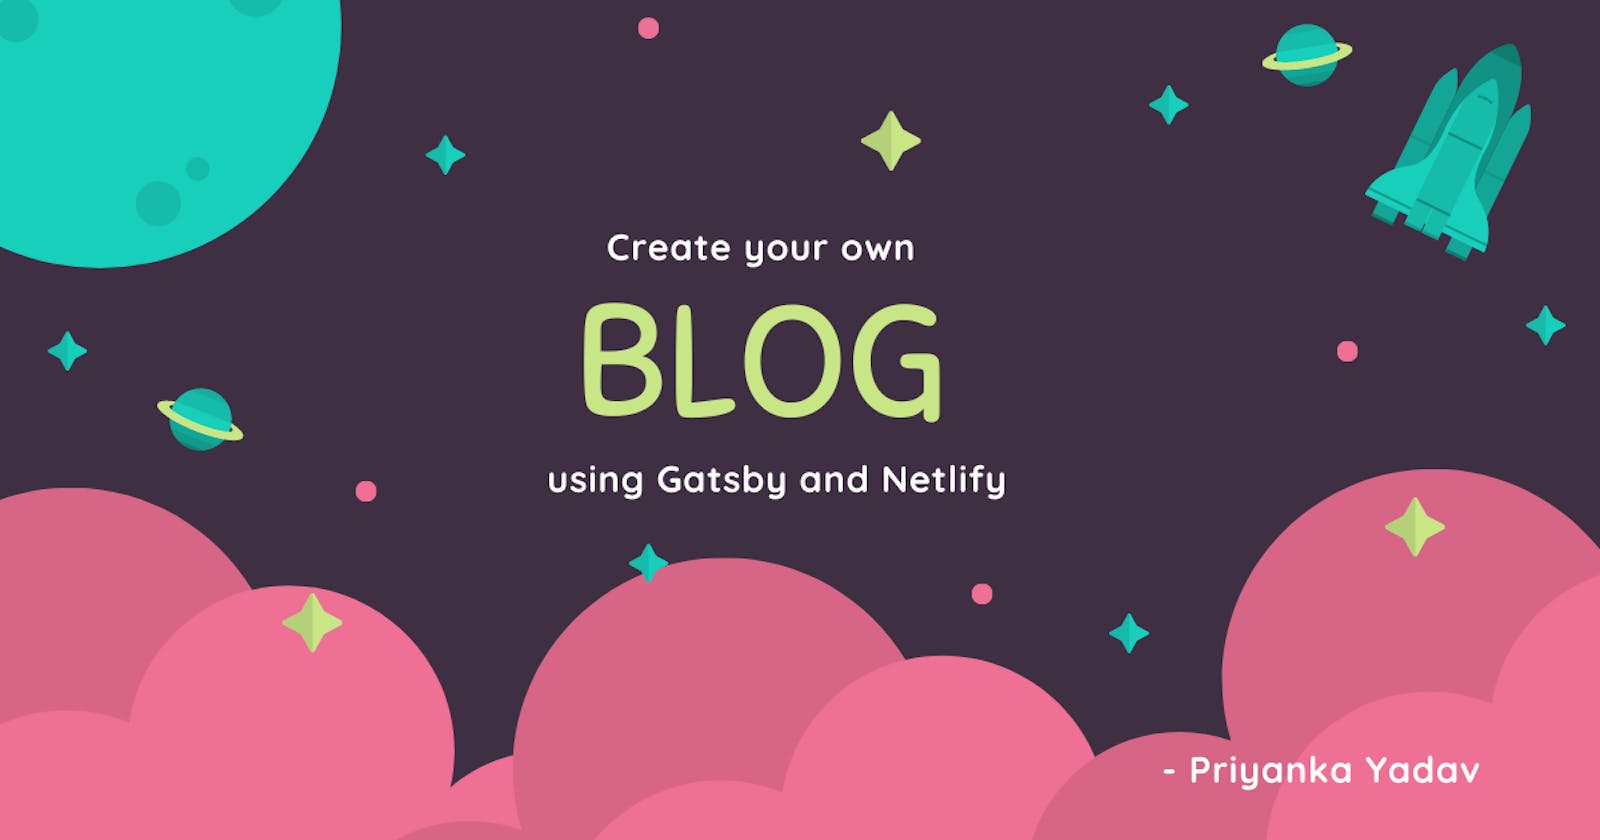 Create your blog using Gatsby and Netlify